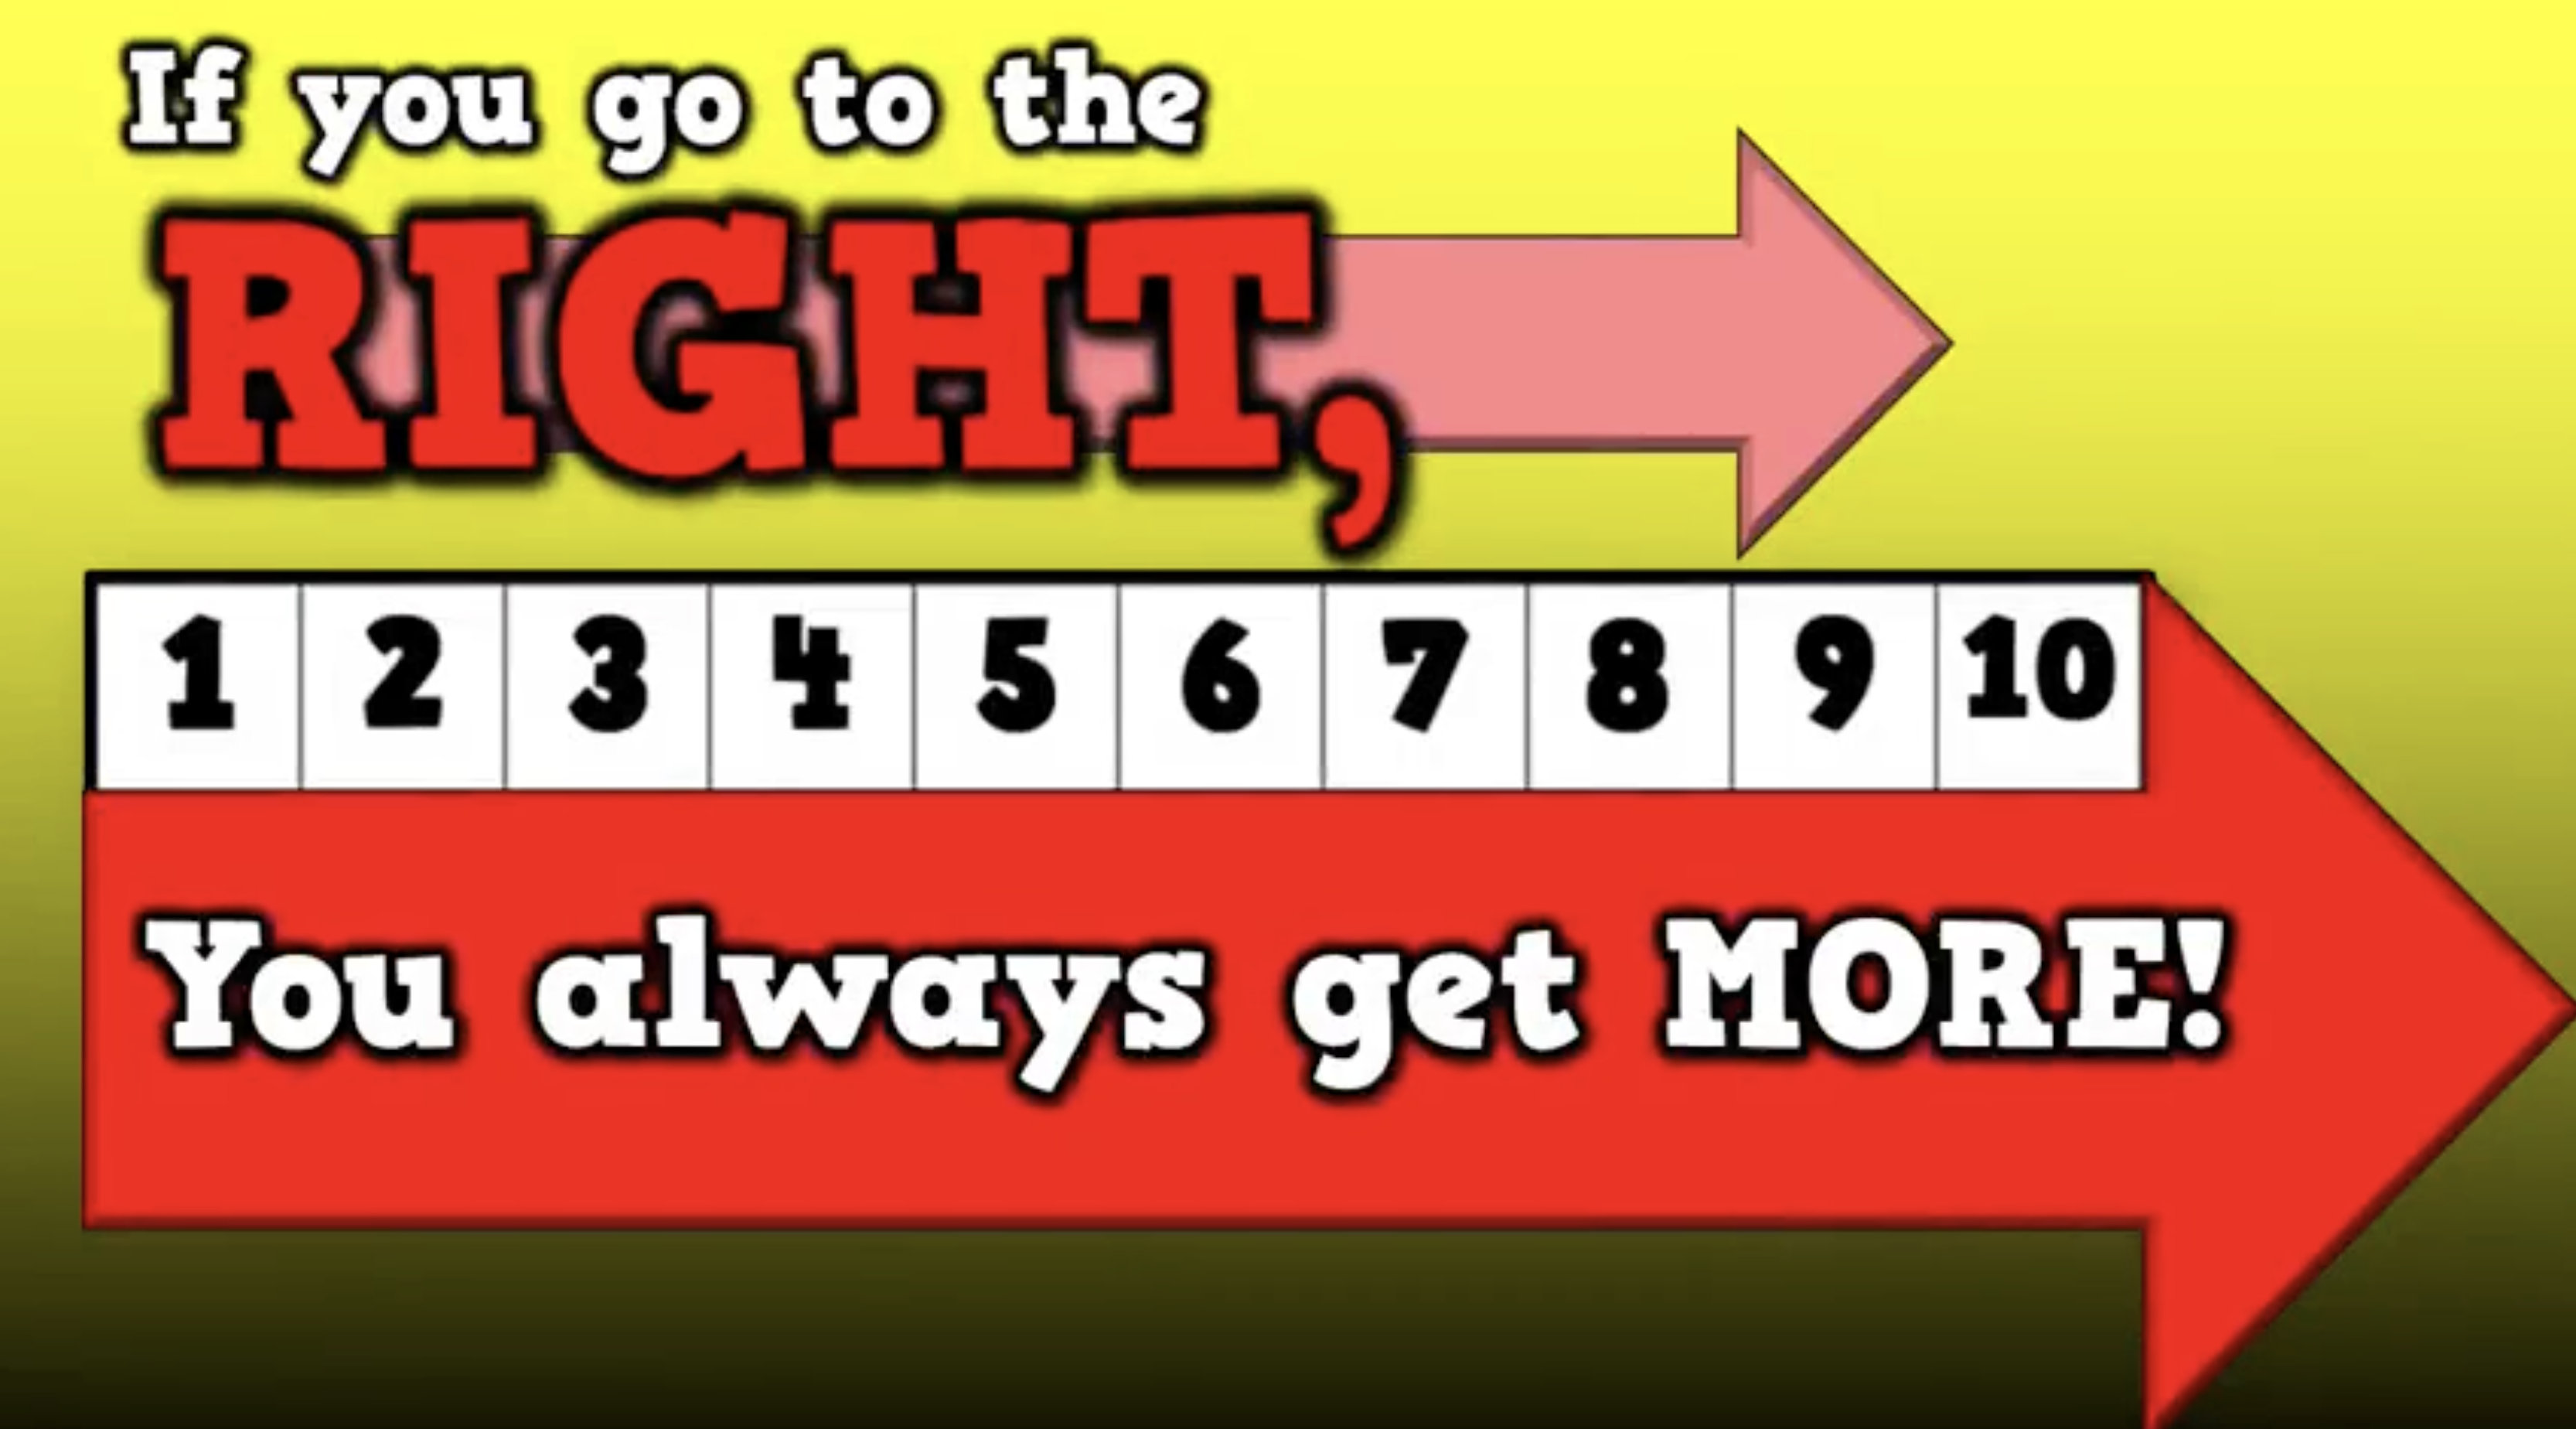 If you go to the right you always get more song